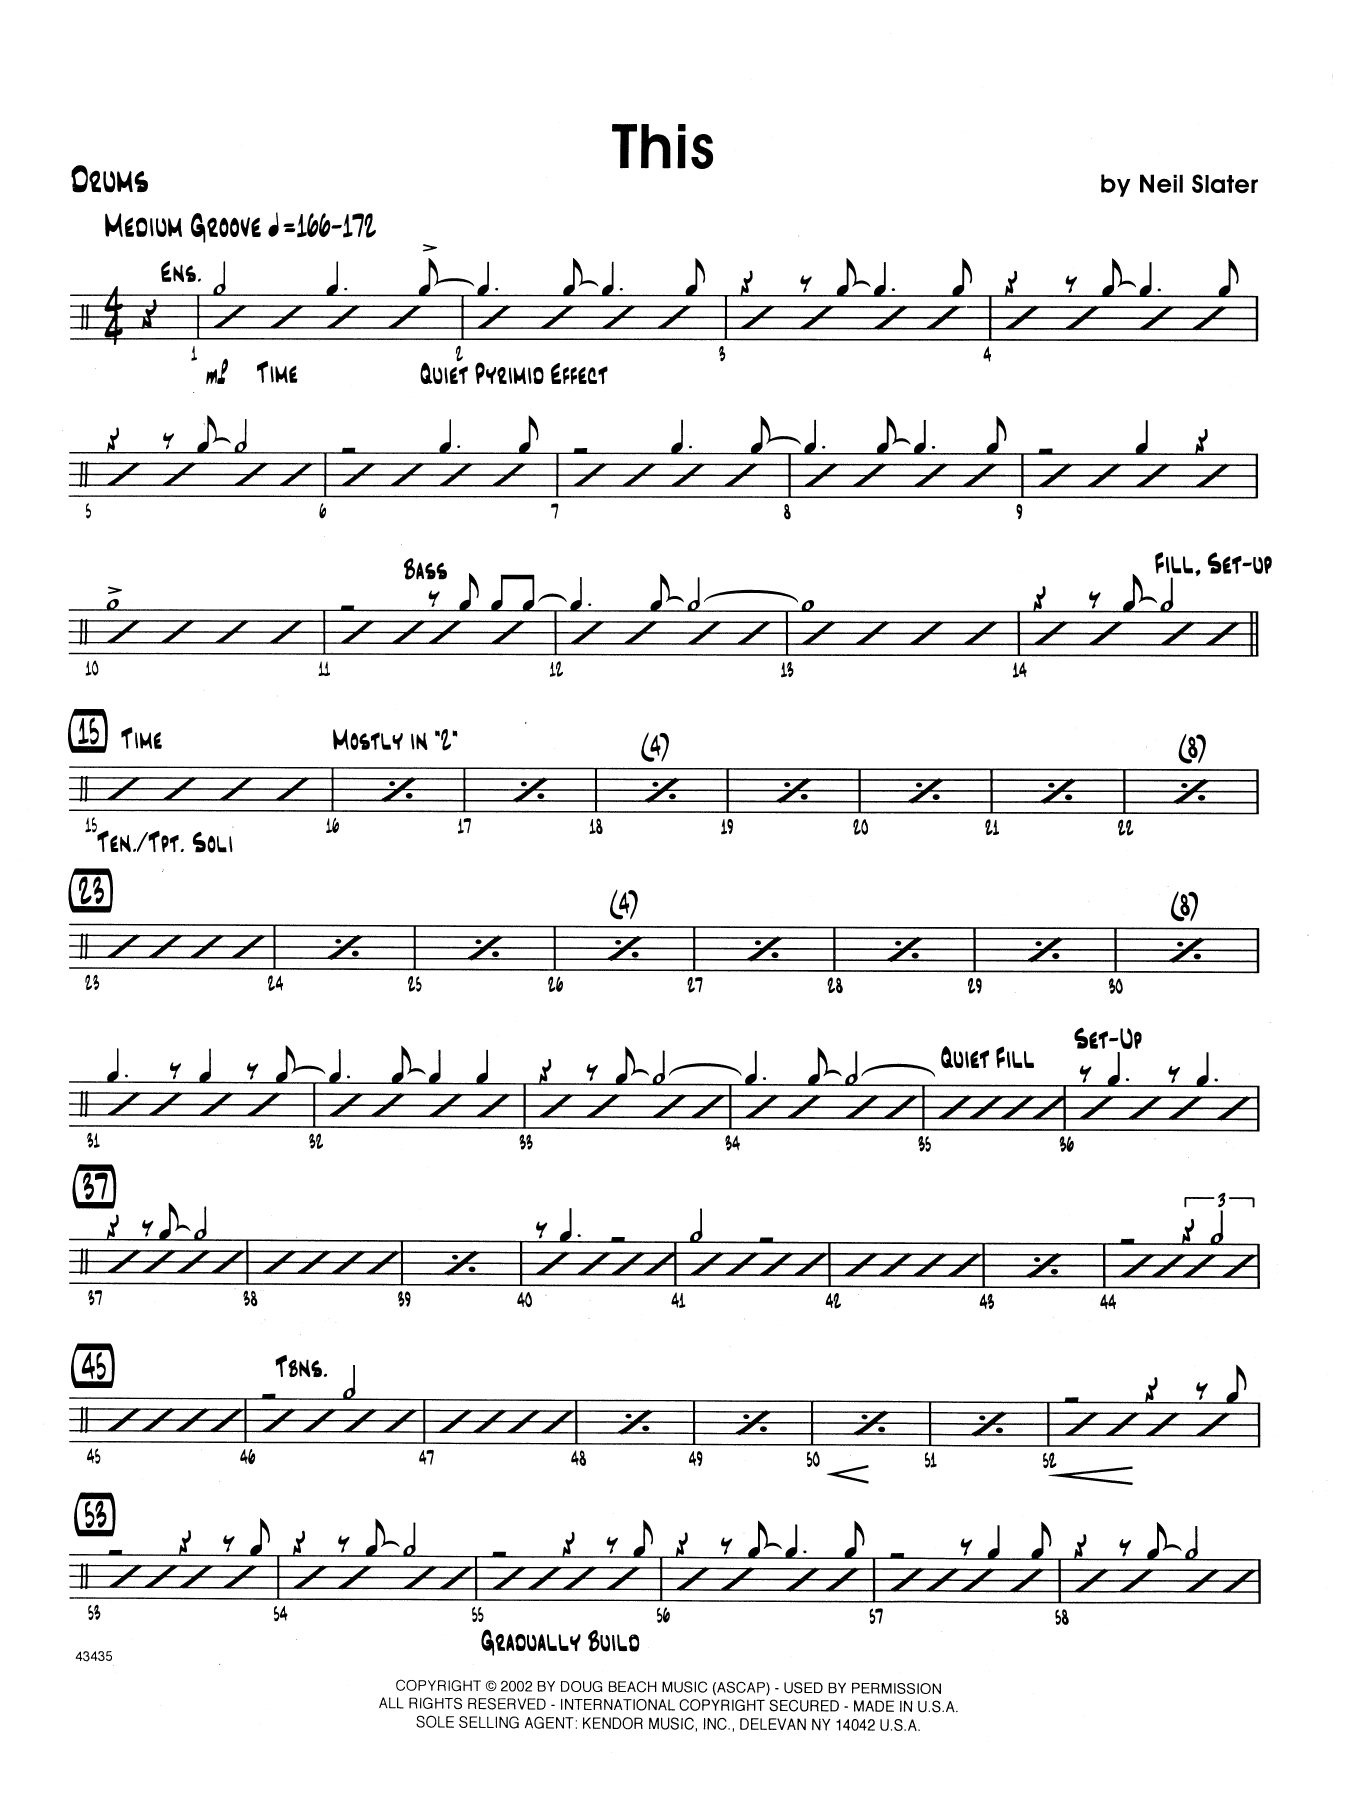 Download Neil Slater This - Drum Set Sheet Music